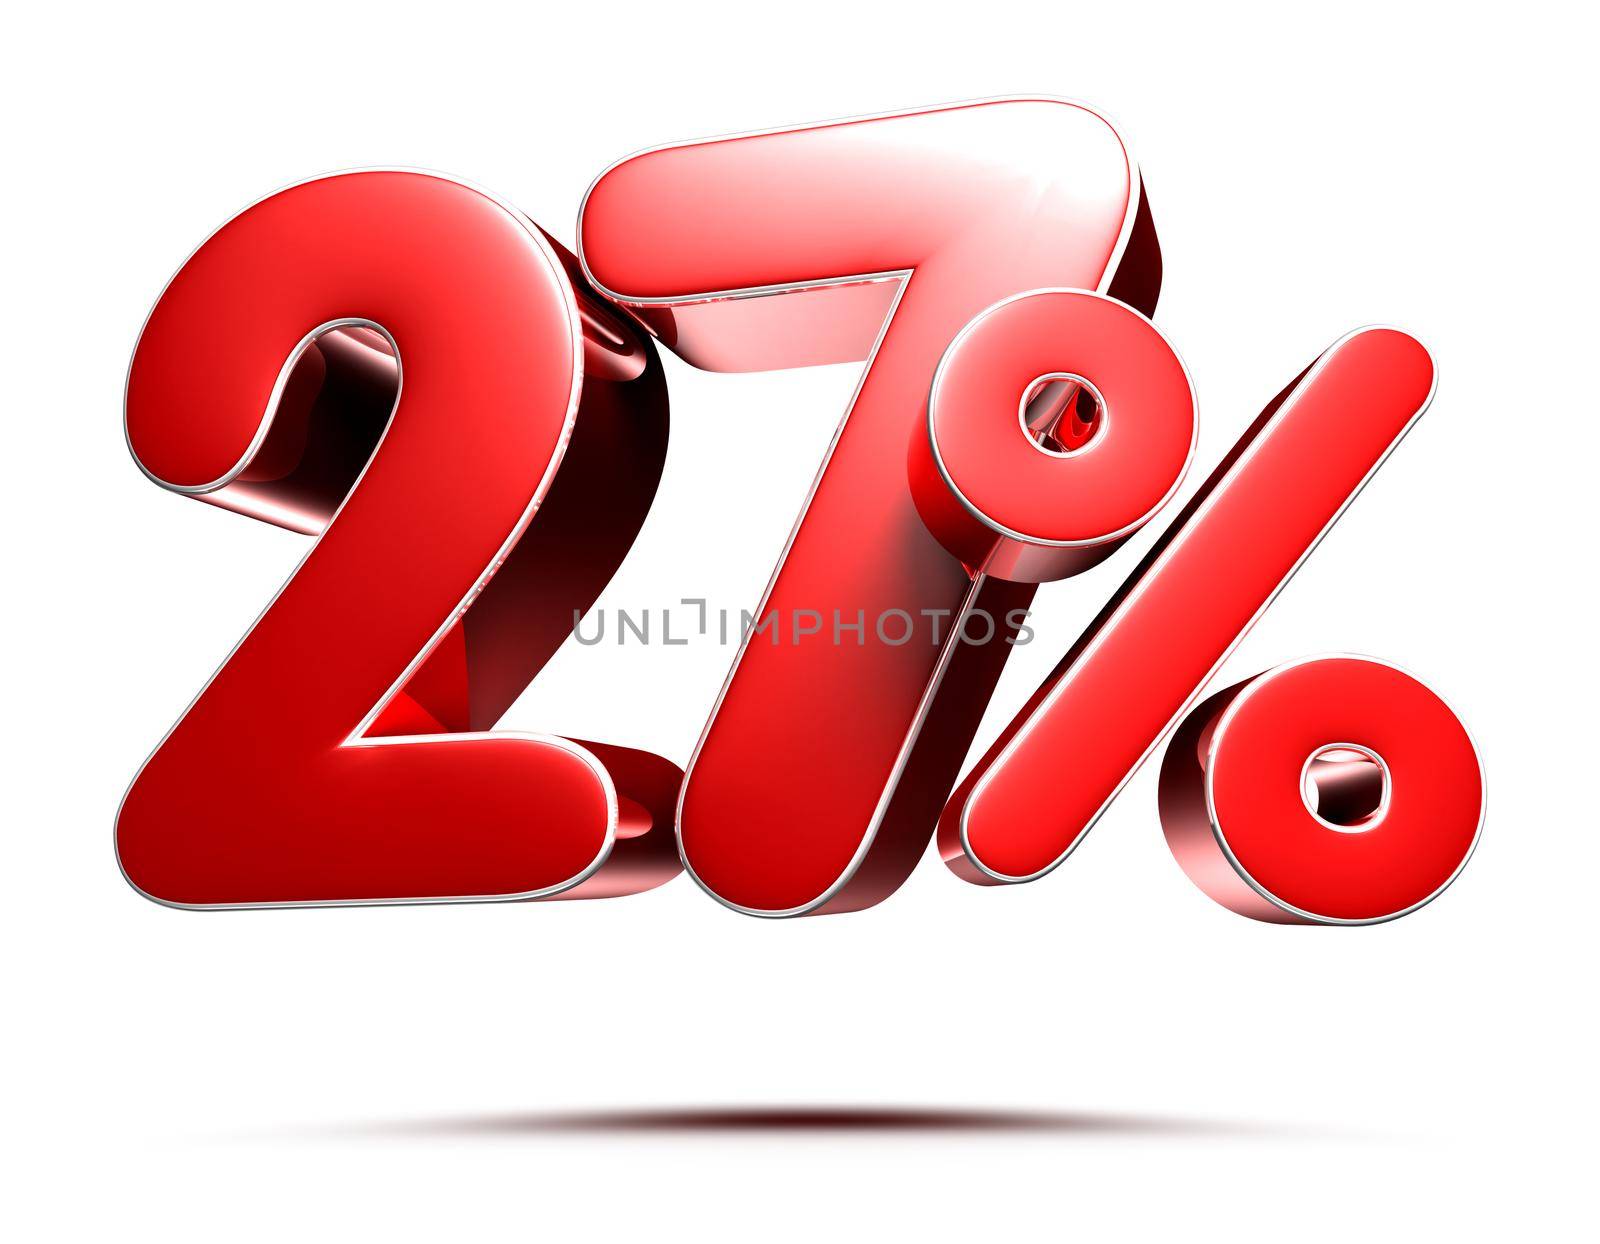 27 percent red on white background illustration 3D rendering with clipping path.